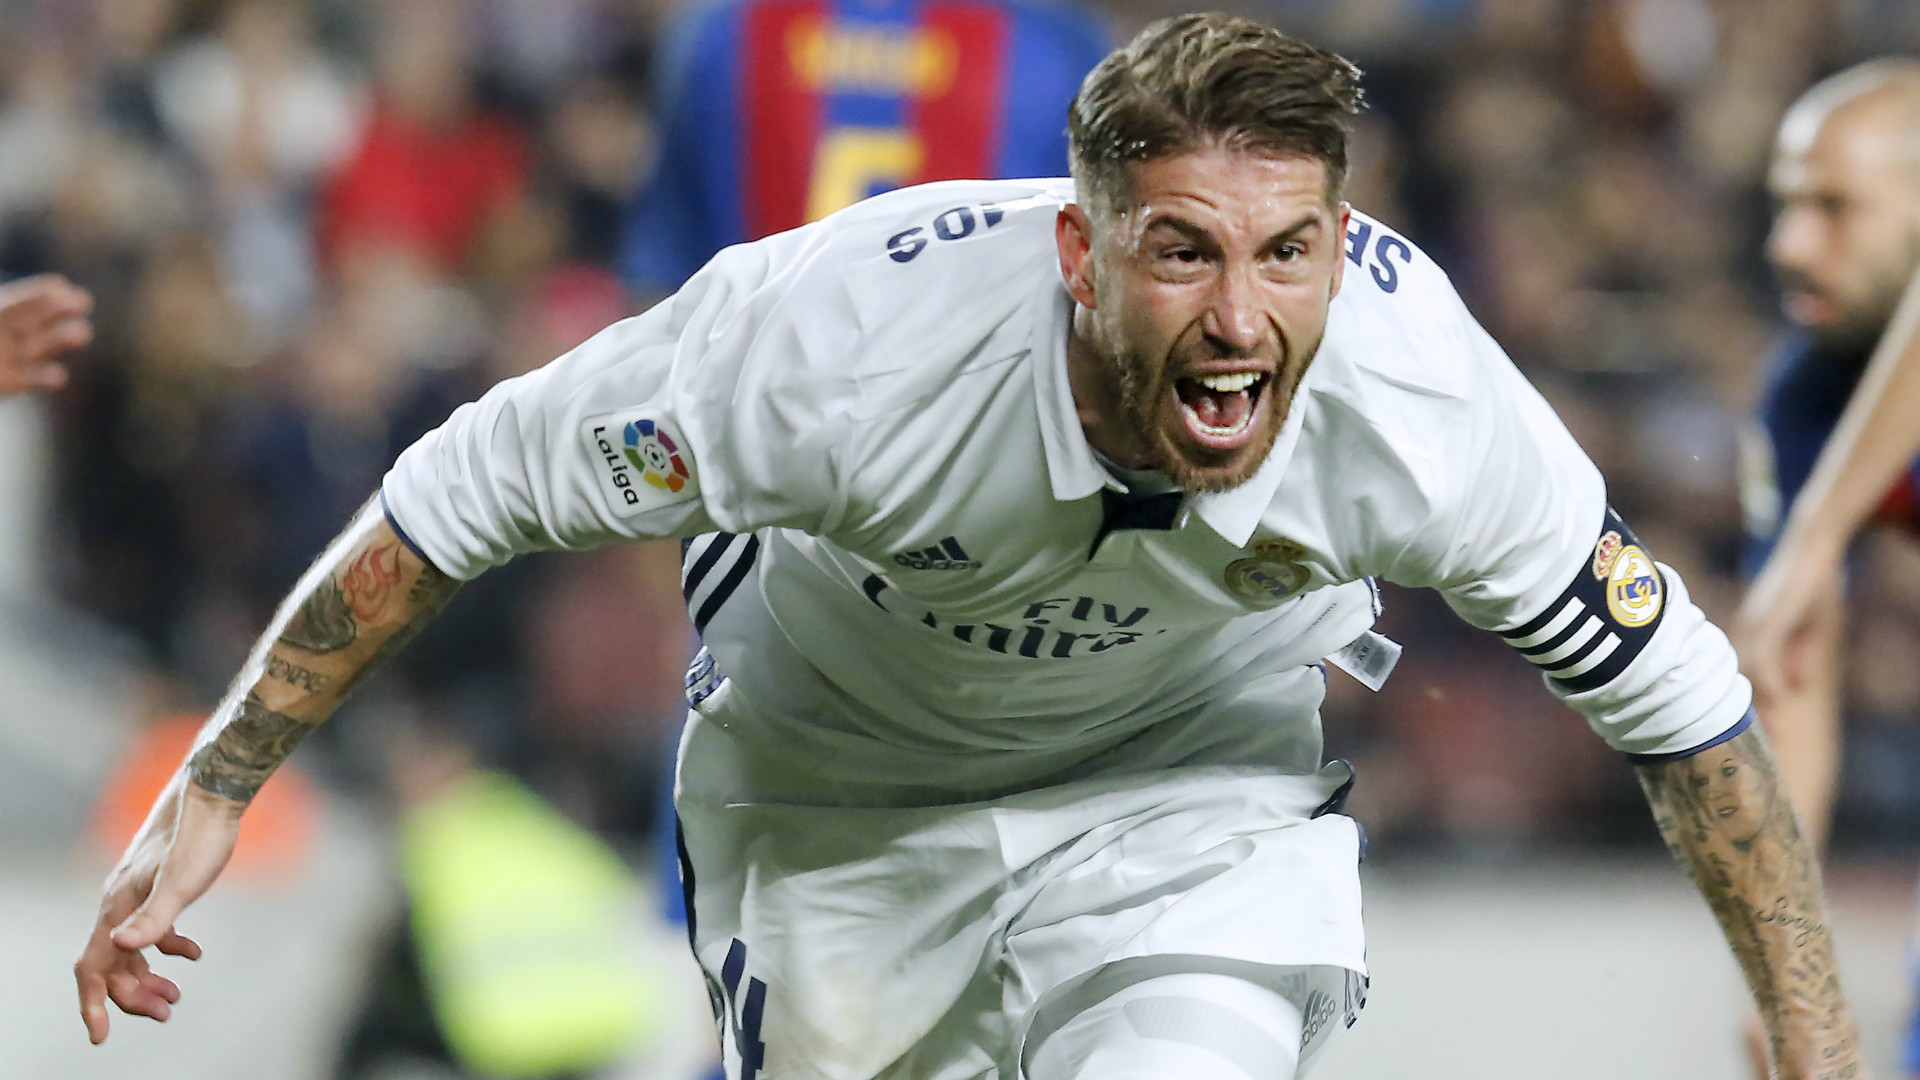 1920x1080 'Ramos is the best player in the world' - Rami